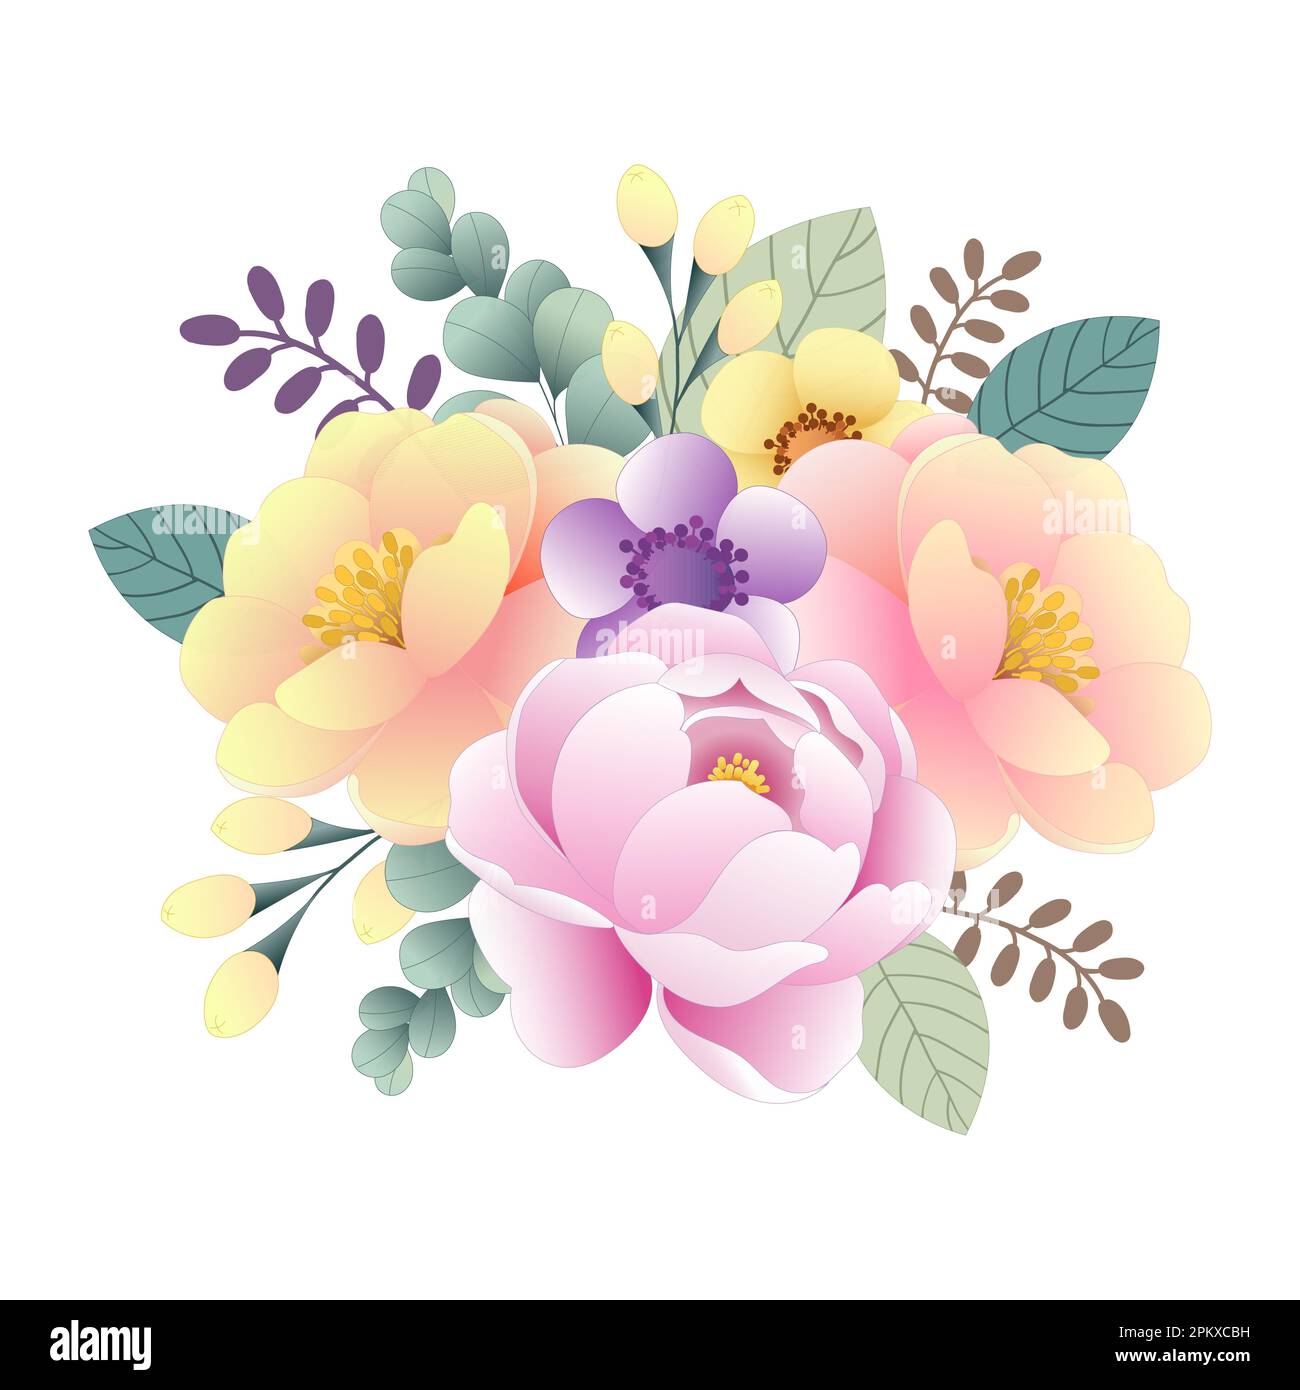 Illustration of a floral arrangement of peonies and anemones in delicate colors. Flower set Stock Vector